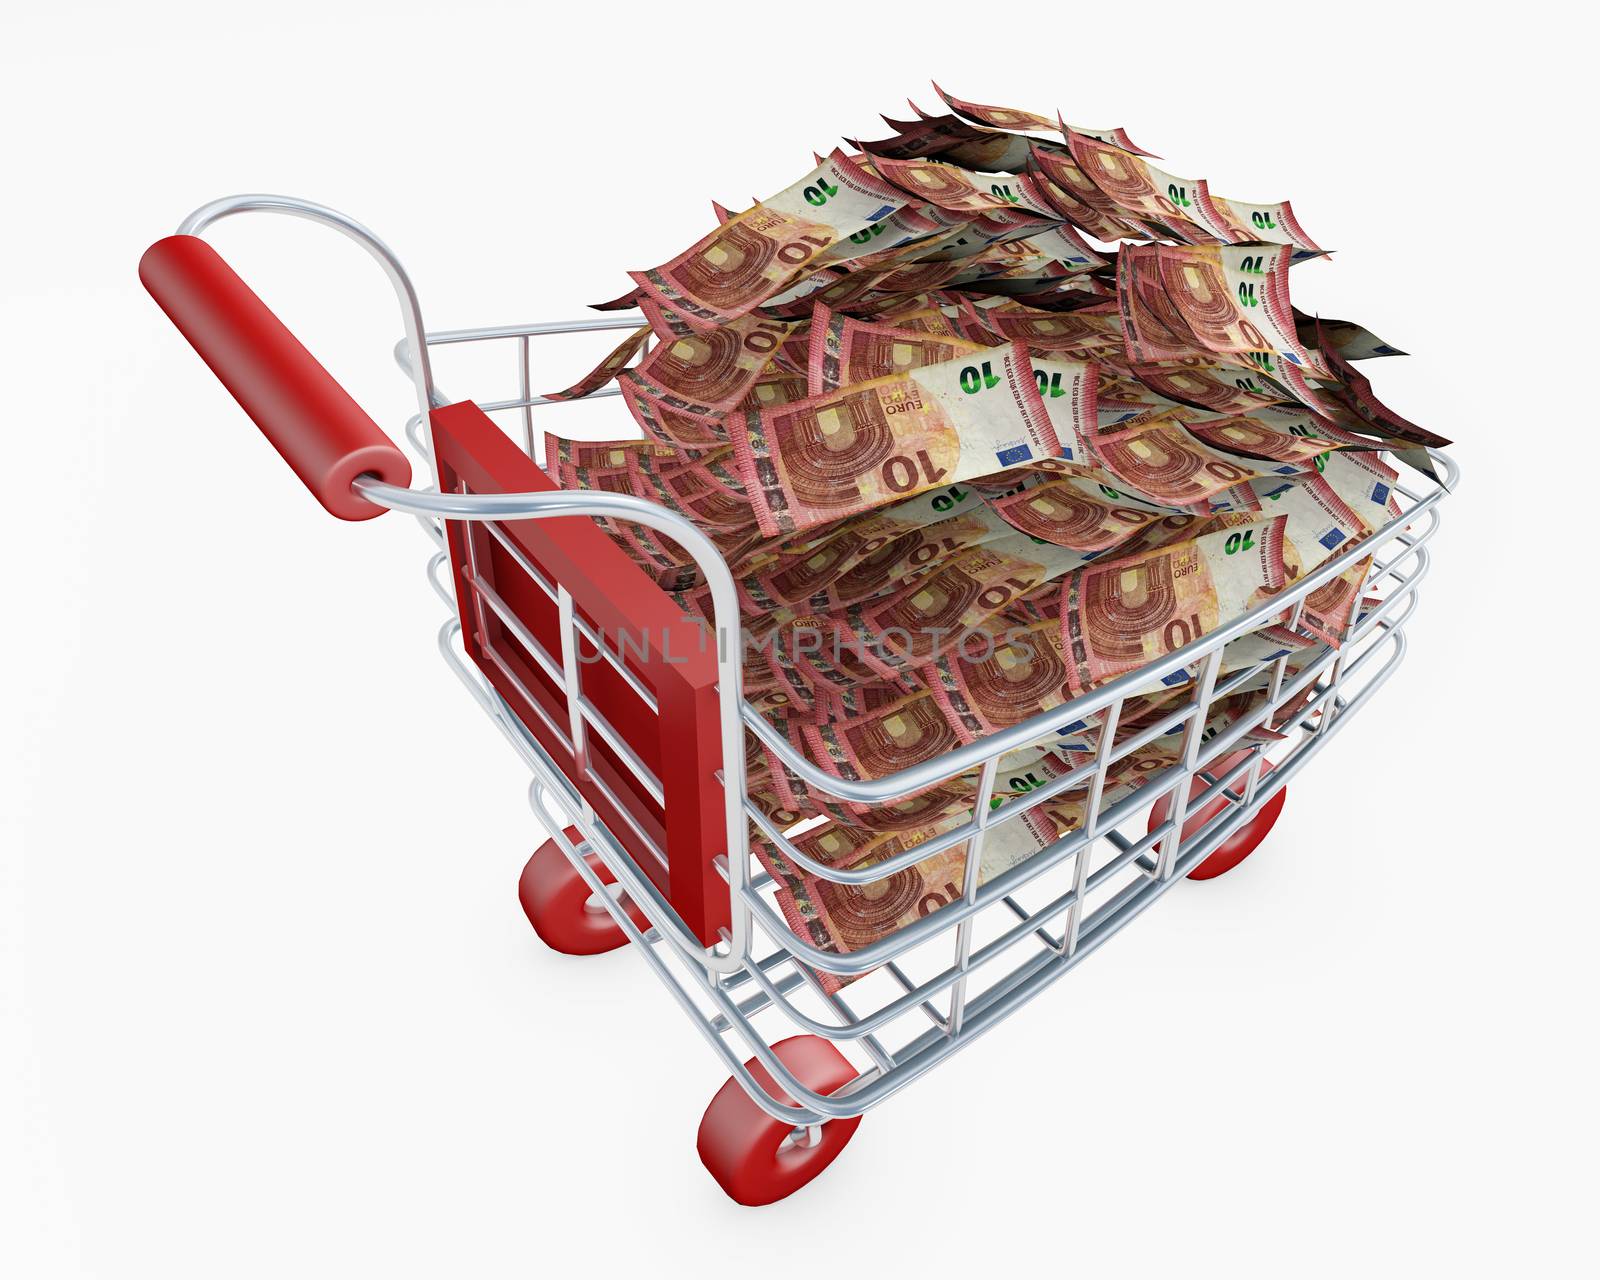 Shopping cart full of money euro banknotes 3d rendering isolated on white